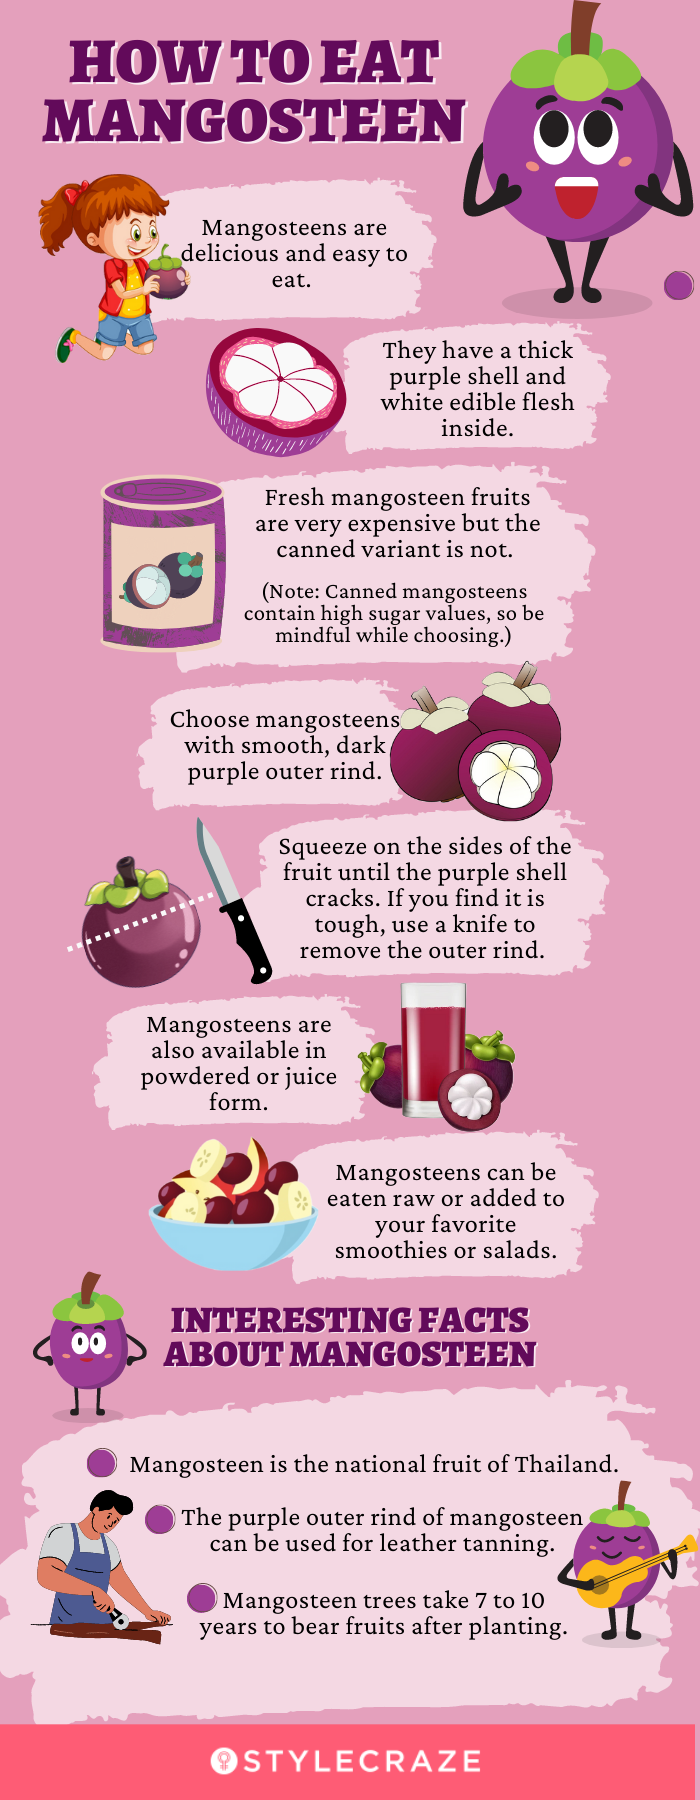 how to eat mangosteen [infographic]